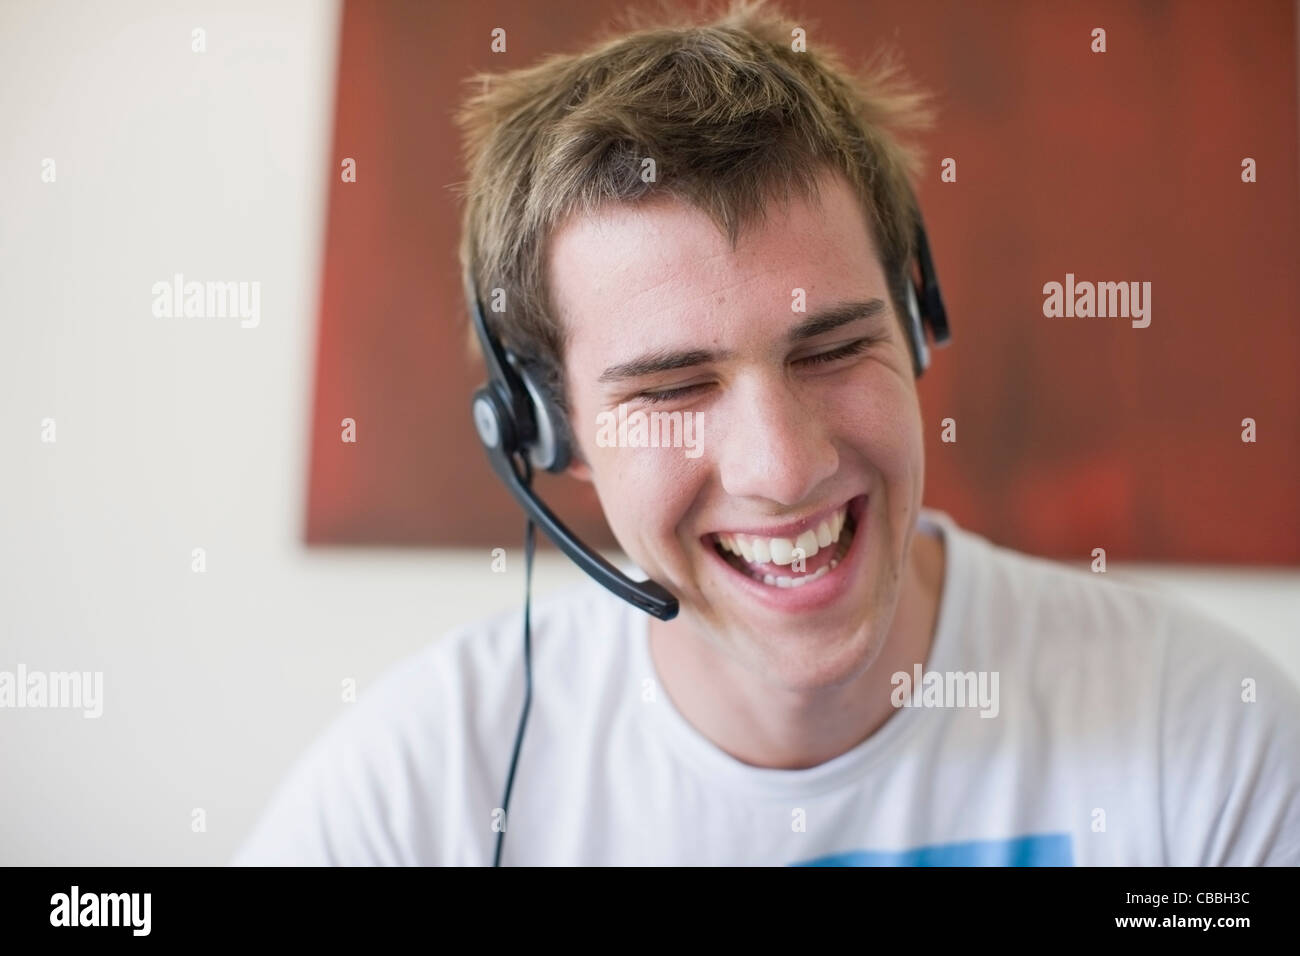 Laughing woman wearing headset Banque D'Images